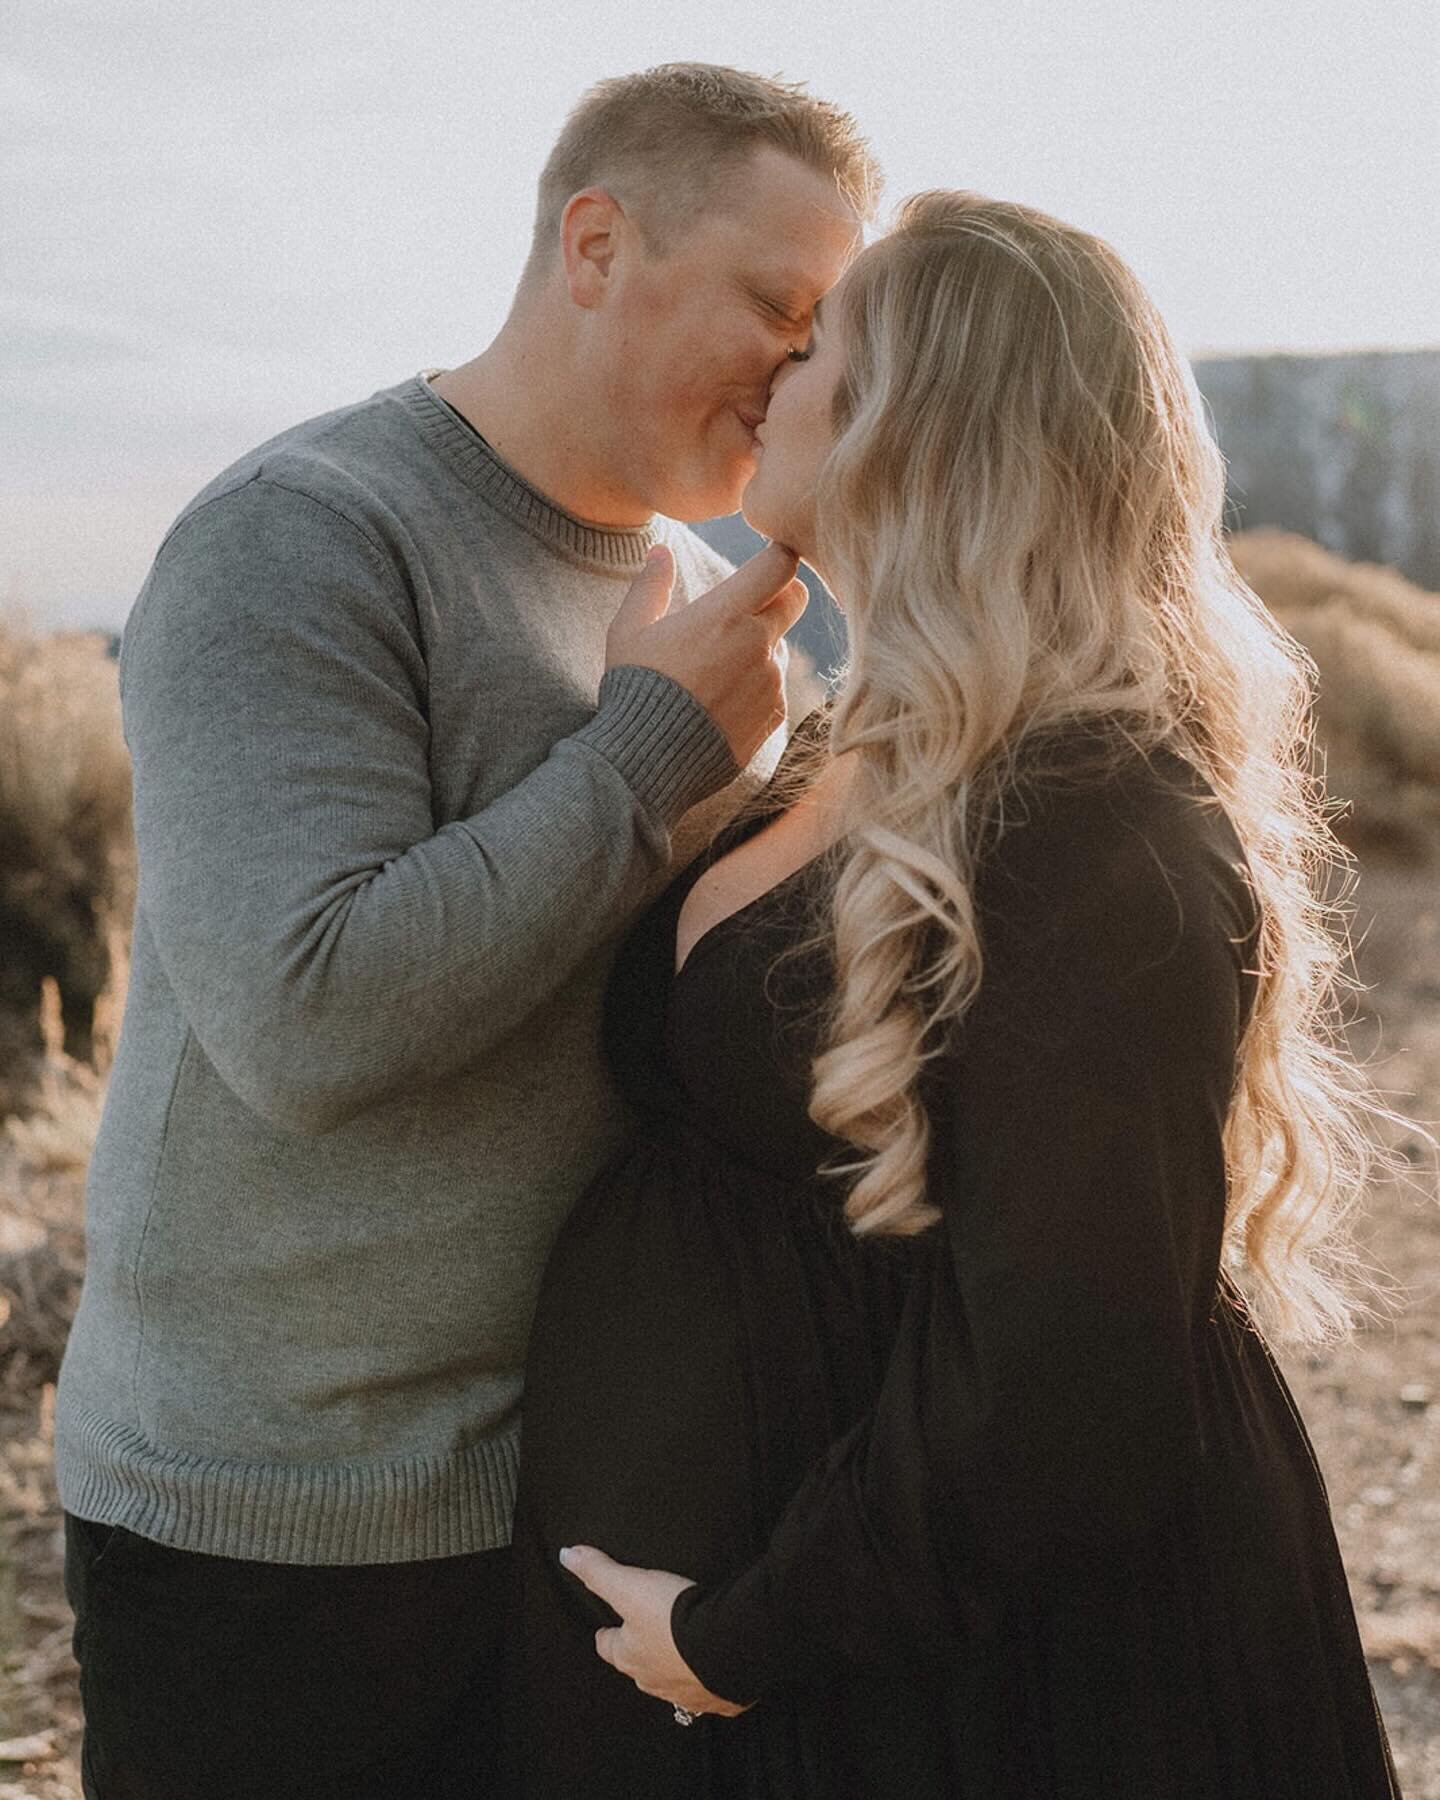 These two are expecting their baby boy anyyyyy day now and I&rsquo;m beyond excited that we were able to make these maternity photos happen. It was the windiest day ever up in the mountains but these two braved the cold and wind for their session and